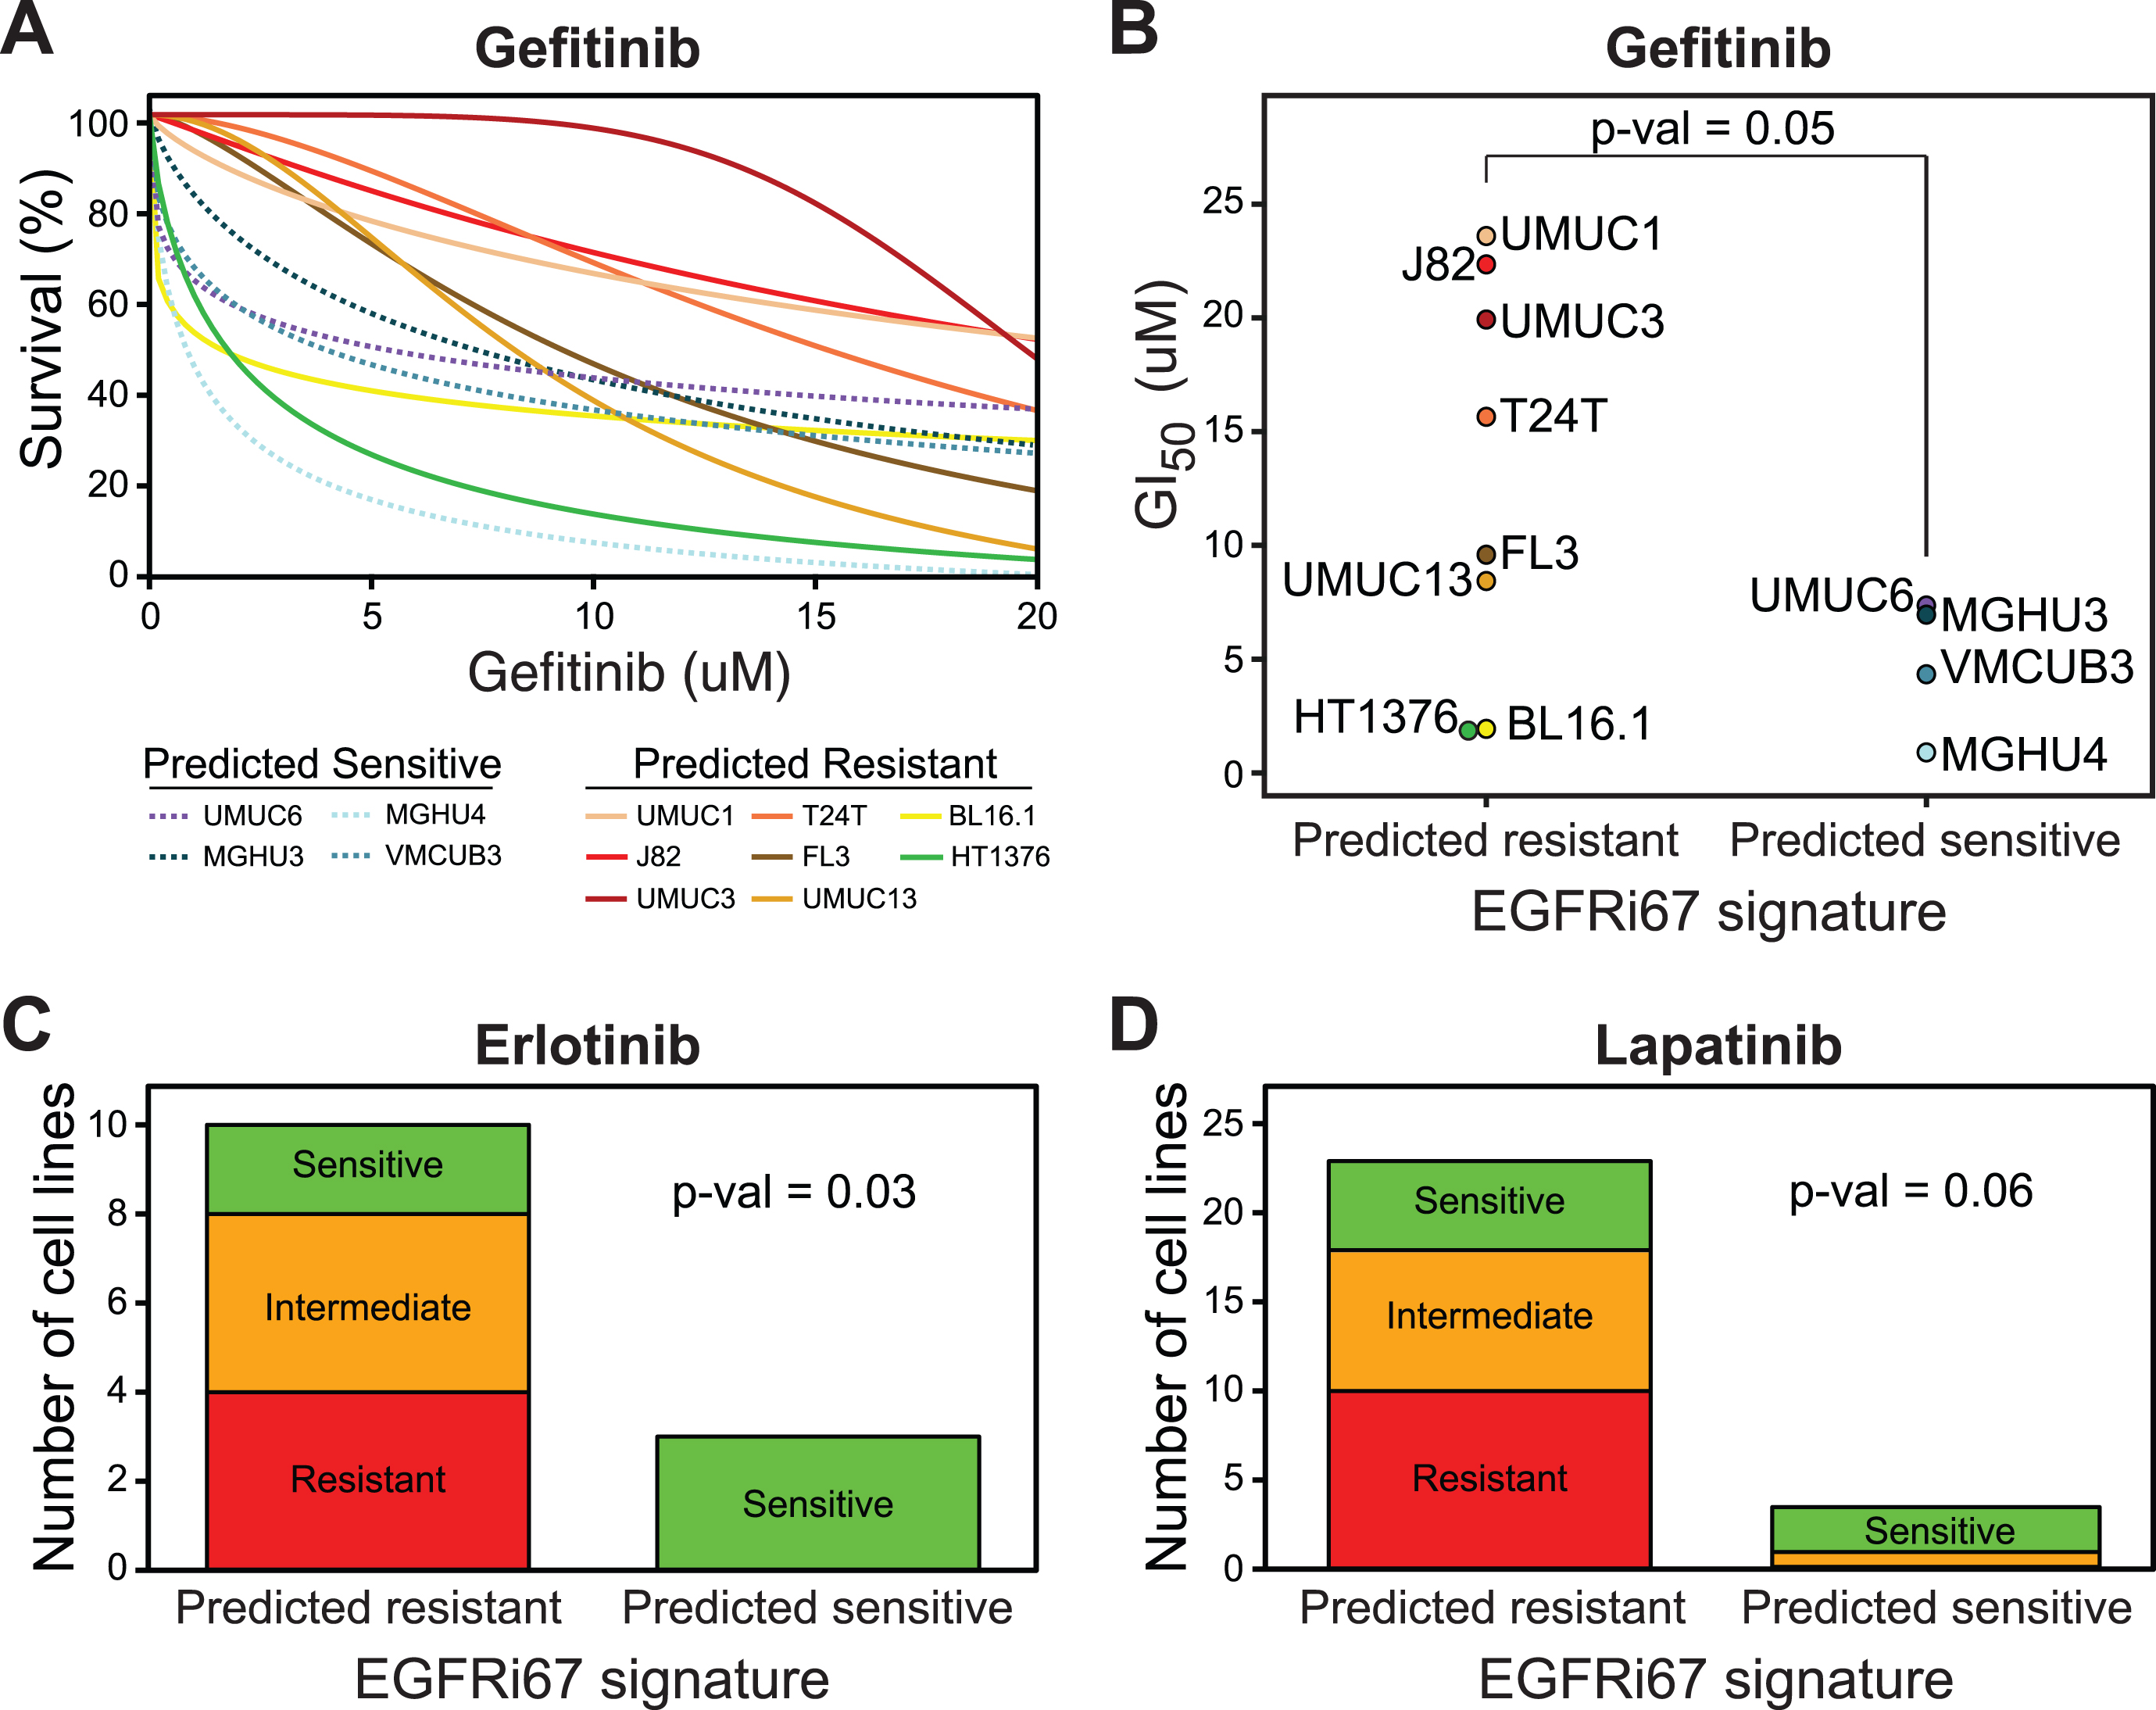 Prediction of EGFR inhibition sensitivity by the EGFRi67 gene signature in bladder cancer cell lines from the BLA40. The EGFRi67 was applied to the BLA40. (A) Dose response curves of 12 bladder cancer cell lines treated with gefitinib. (B) The bladder cancer cell lines were grouped by their predicted response to EGFR inhibition and the GI50 of each cell line is shown (p = 0.05, Wilcoxon rank sum test). Two publically available datasets were used to evaluate the prediction of (C) erlotinib and (D) lapatinib sensitivity by the EGFRi67 (p = 0.03 and p = 0.06, respectively, Fisher’s exact test).